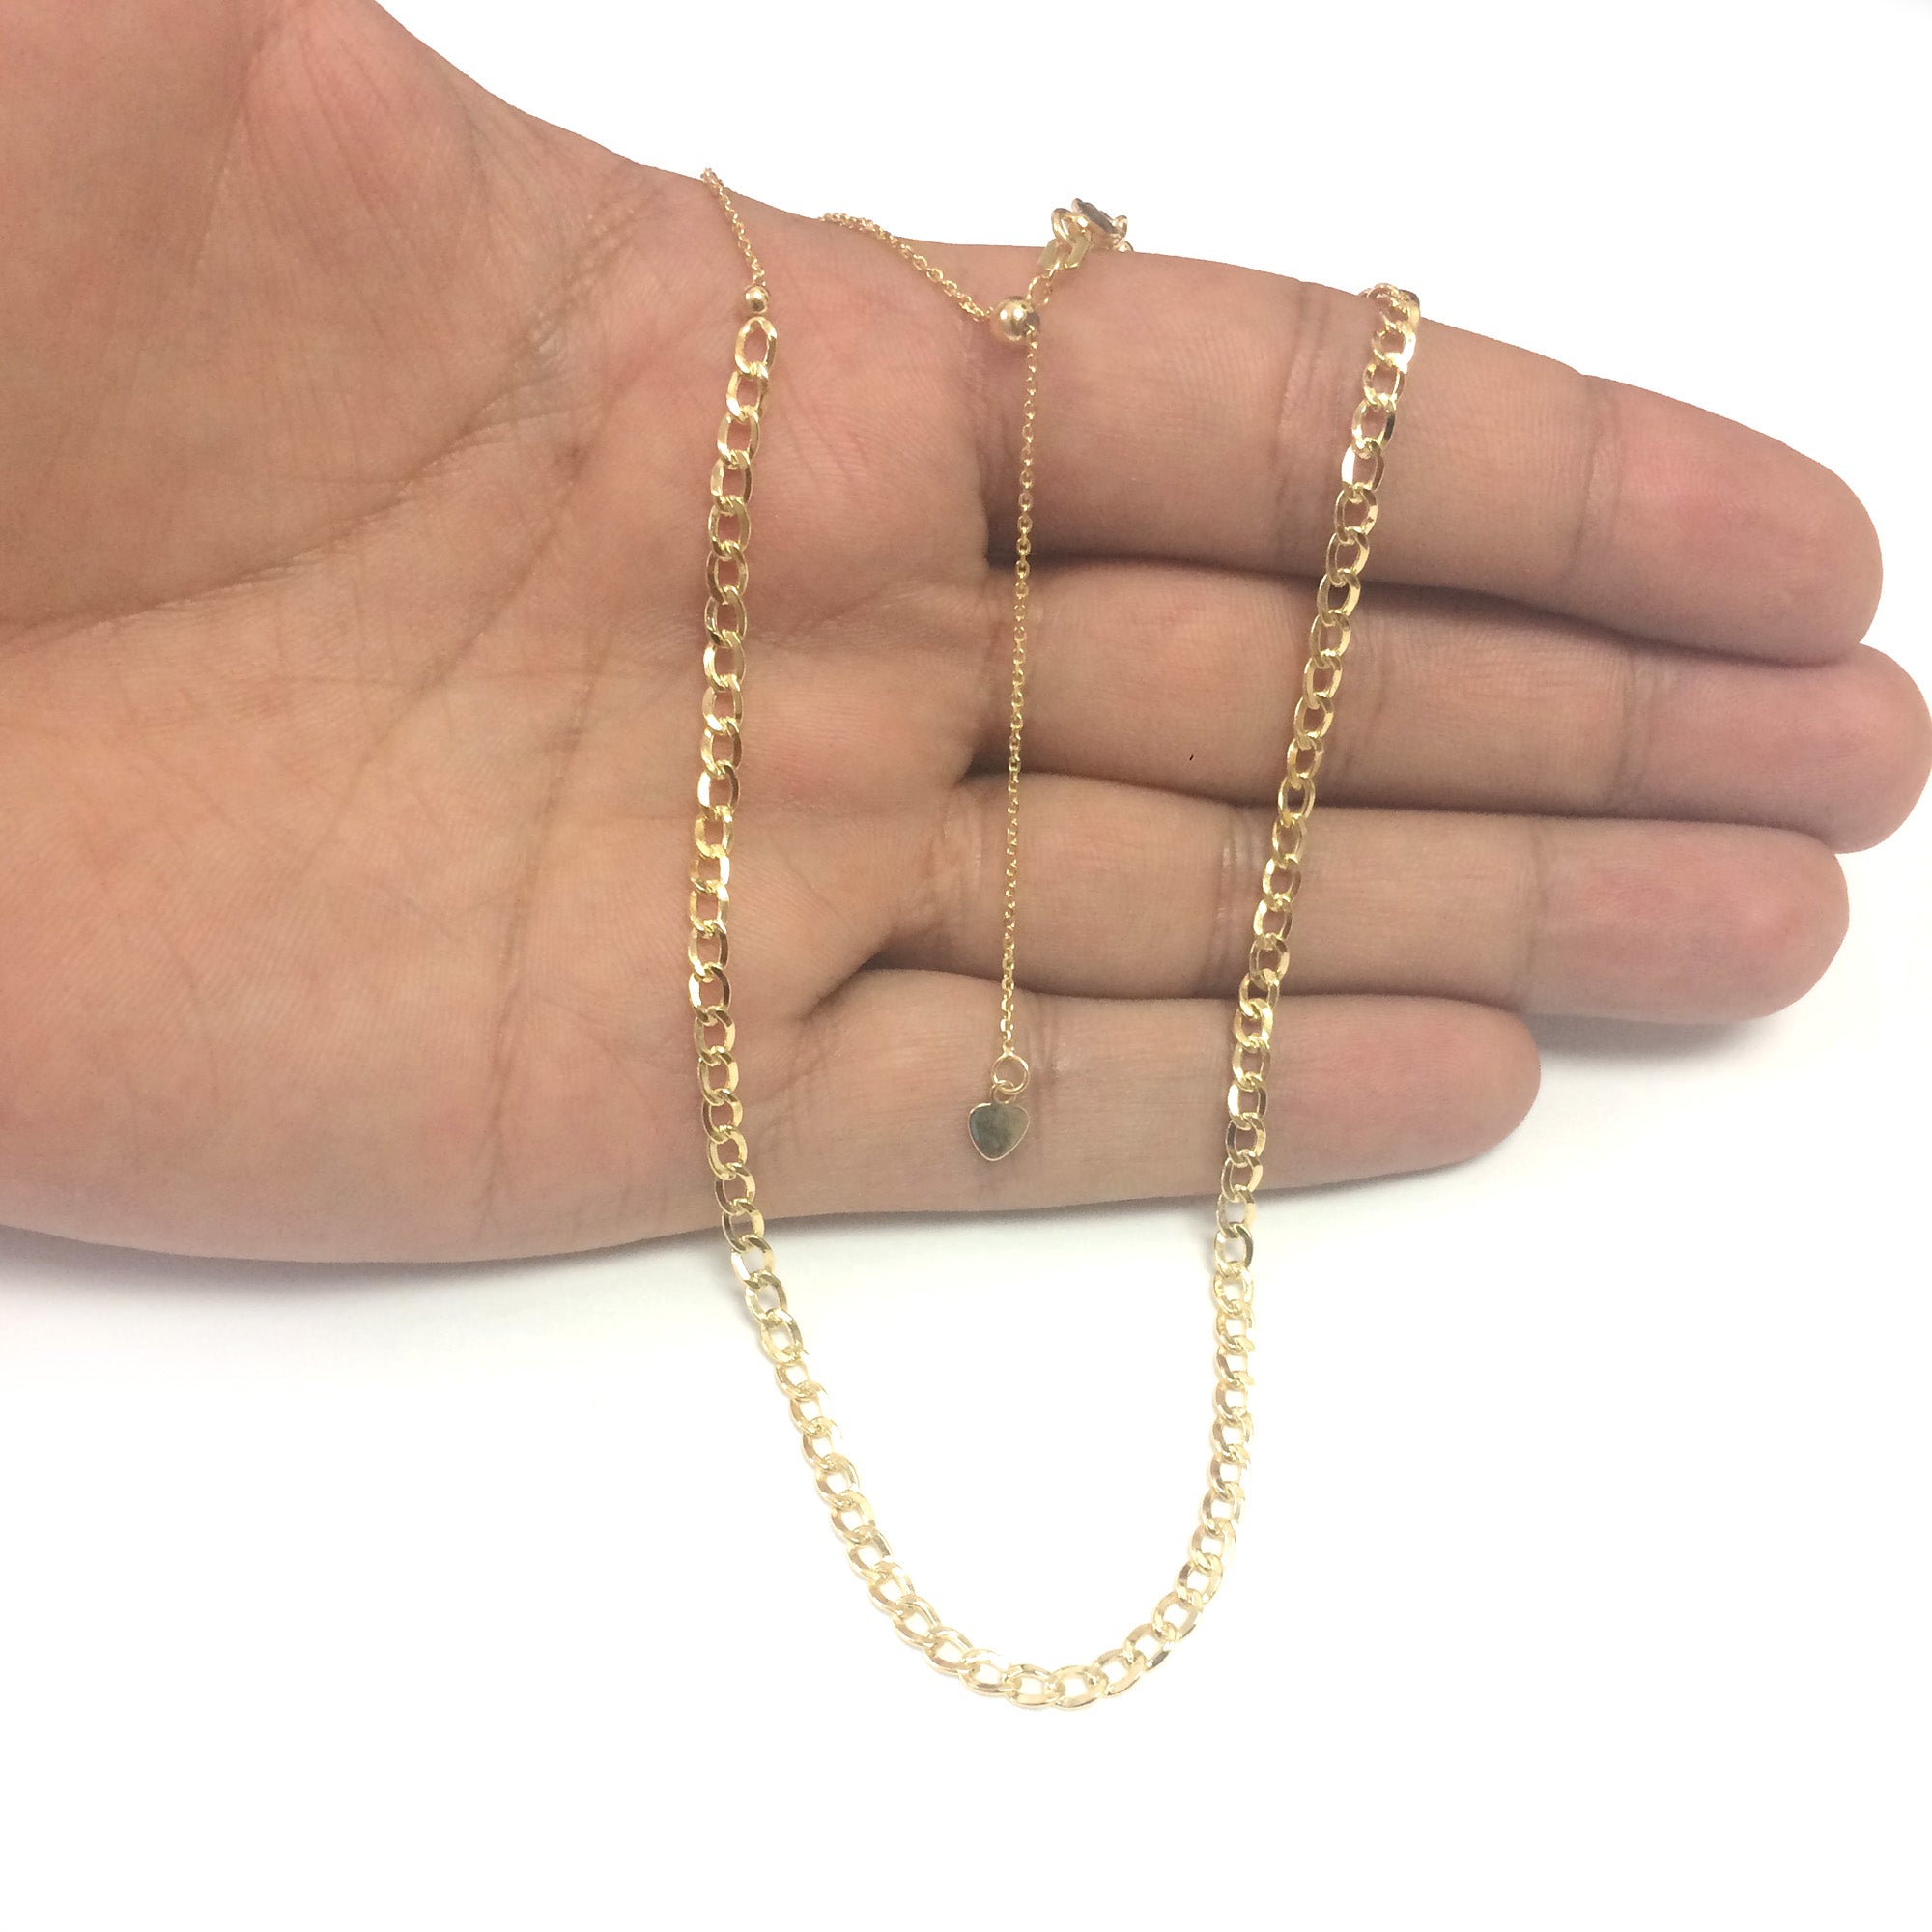 Curb Chain Choker 14k Yellow Gold Necklace, 16" Adjustable